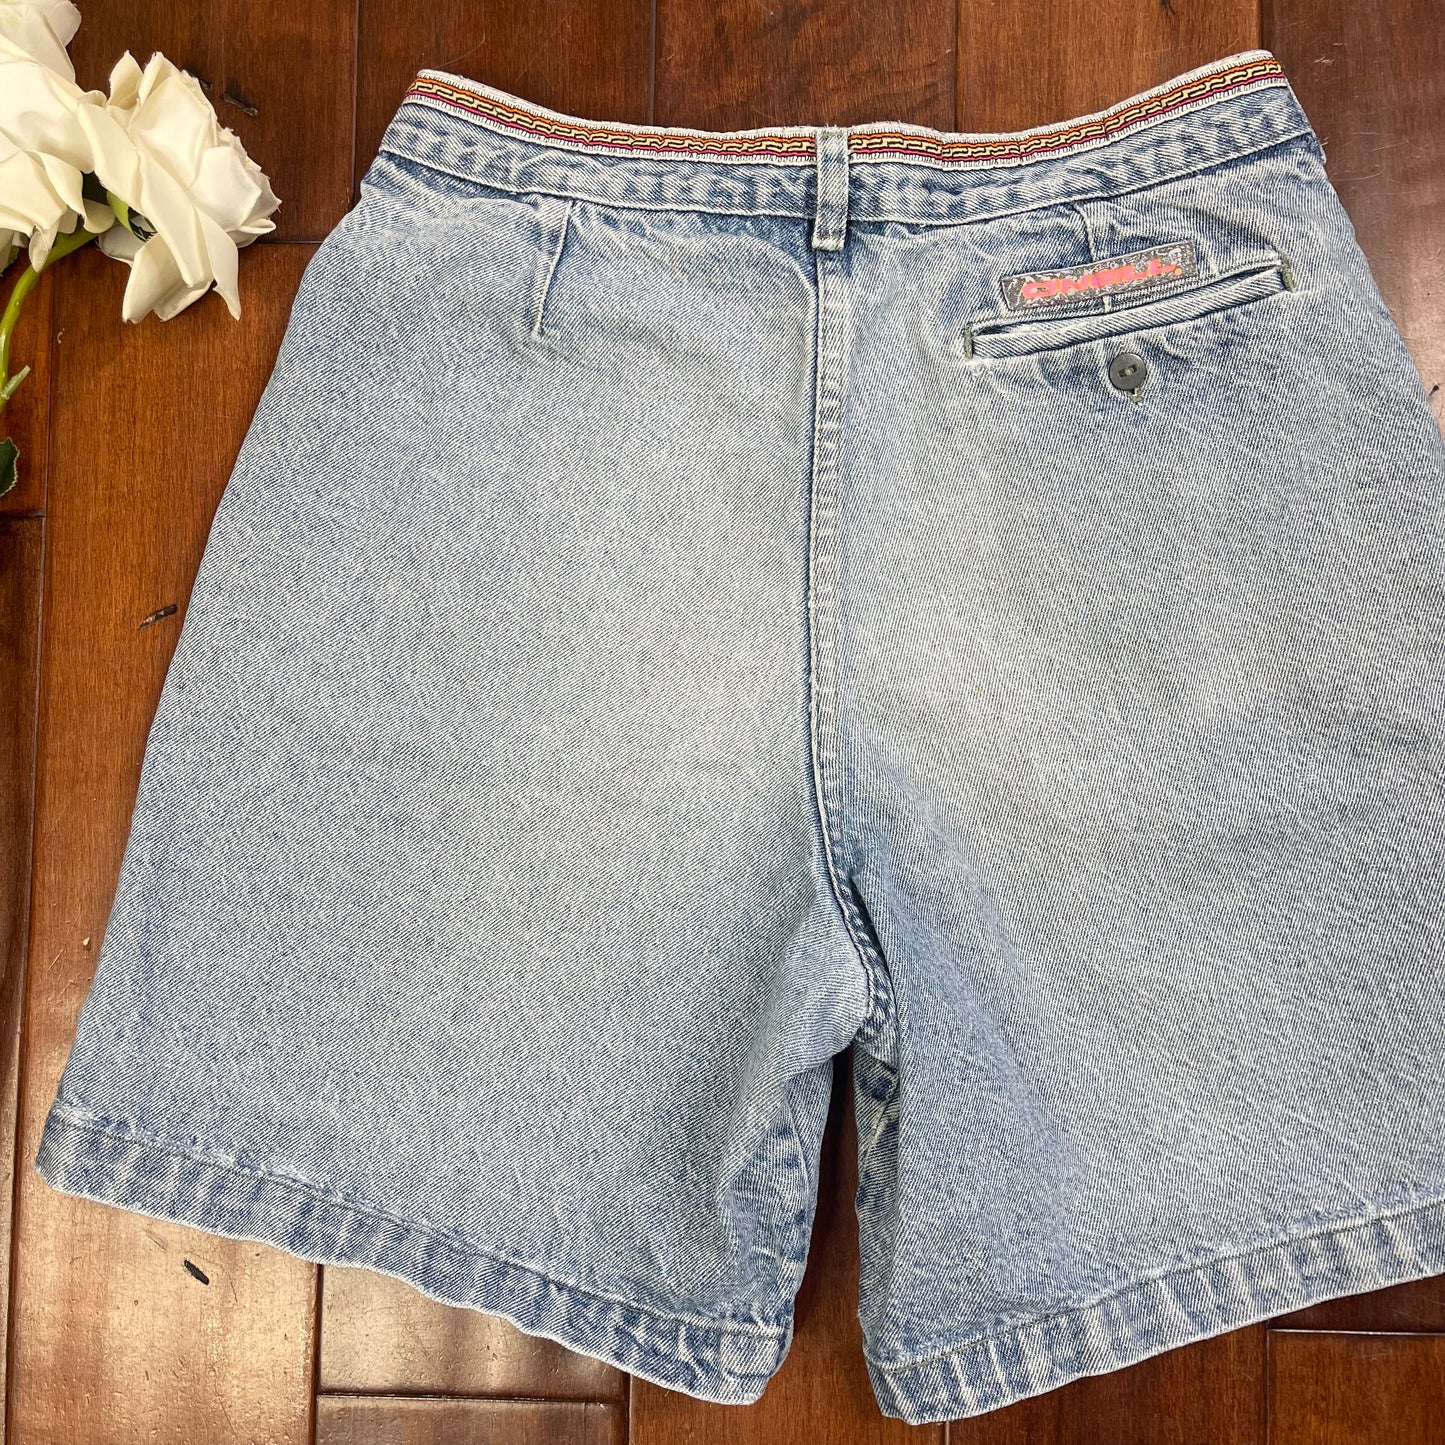 VINTAGE EMBROIDERED HIGH-WAISTED JEAN SHORTS